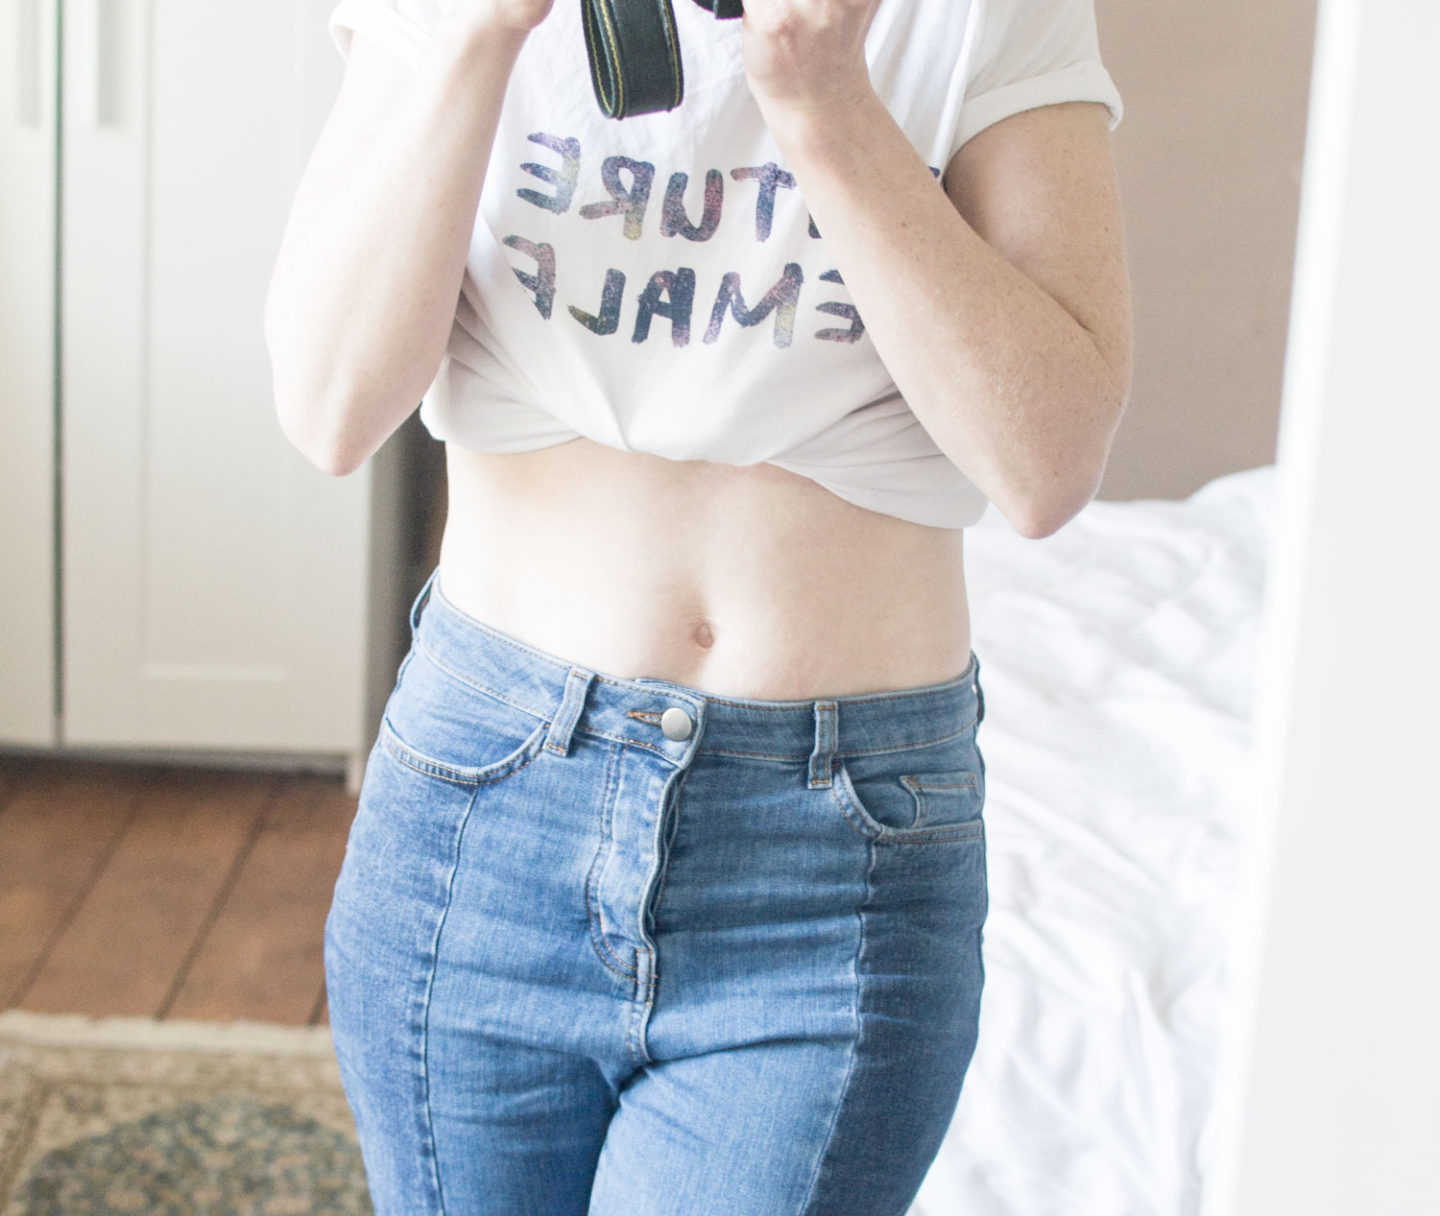 Does MUTU System work? Lifestyle blogger Karen Maurice's tummy after